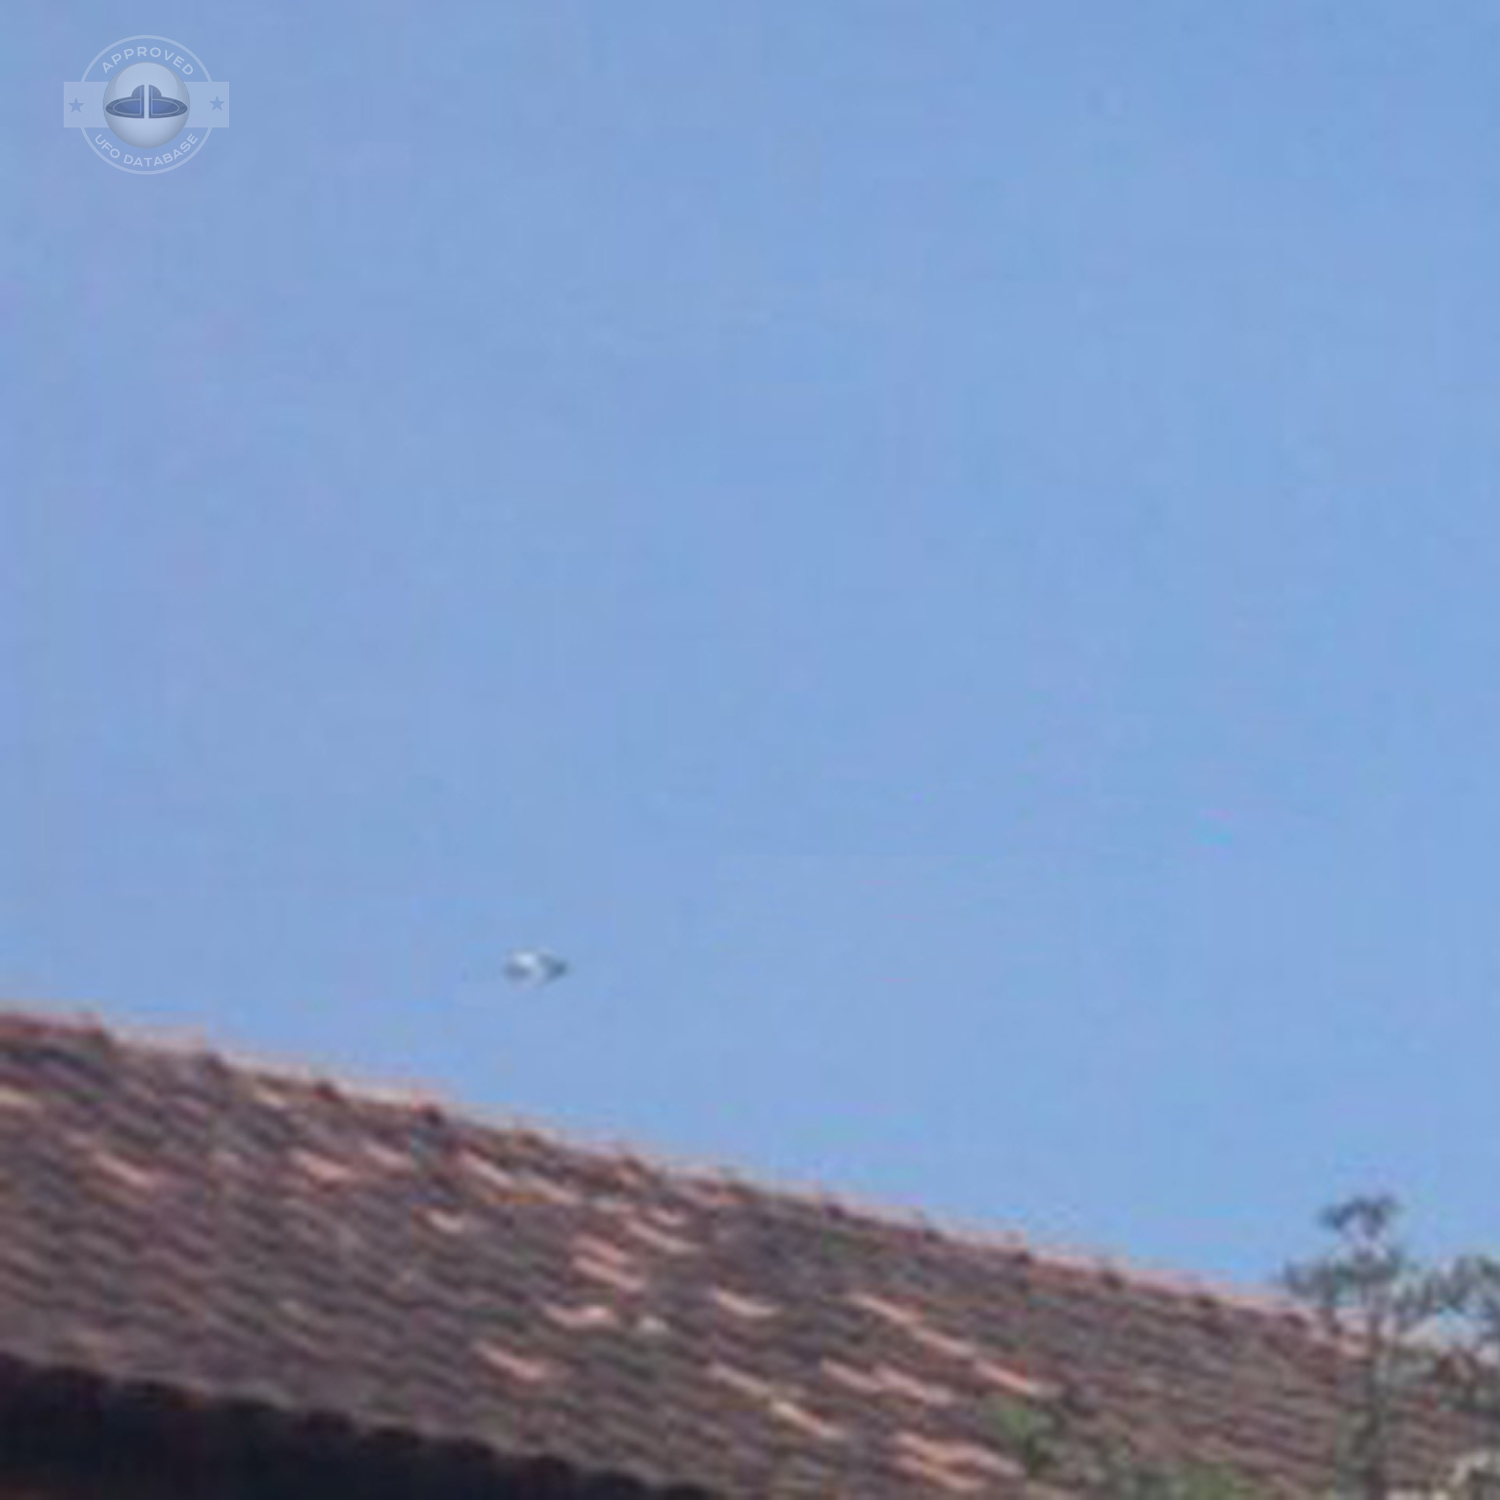 Fast Saucer UFO over houses of Ibirite, Minas Gerais, Brazil | 2008 UFO Picture #214-3